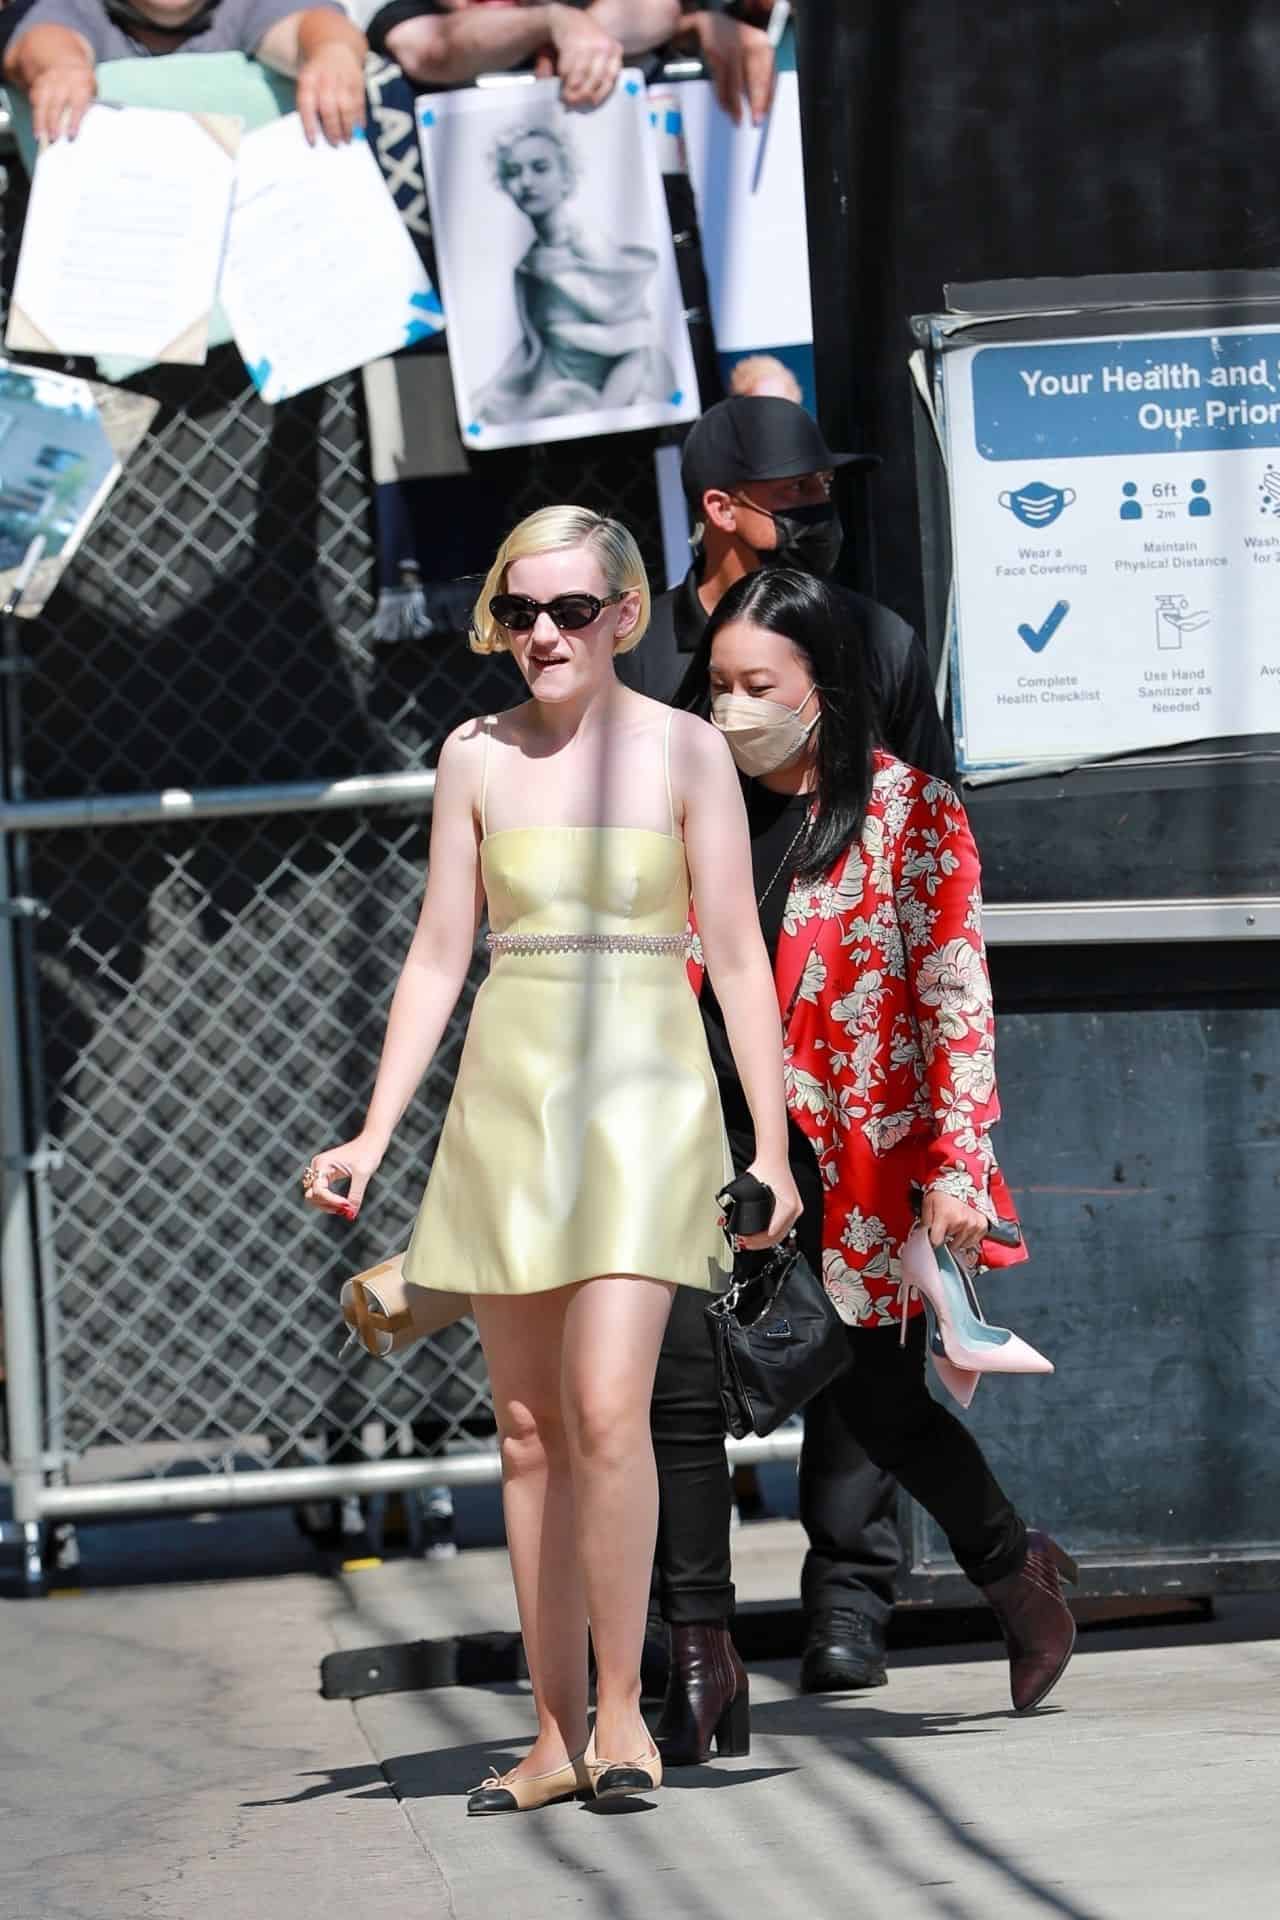 Julia Garner in a Gold Dress Arriving at the Jimmy Kimmel Show in Hollywood